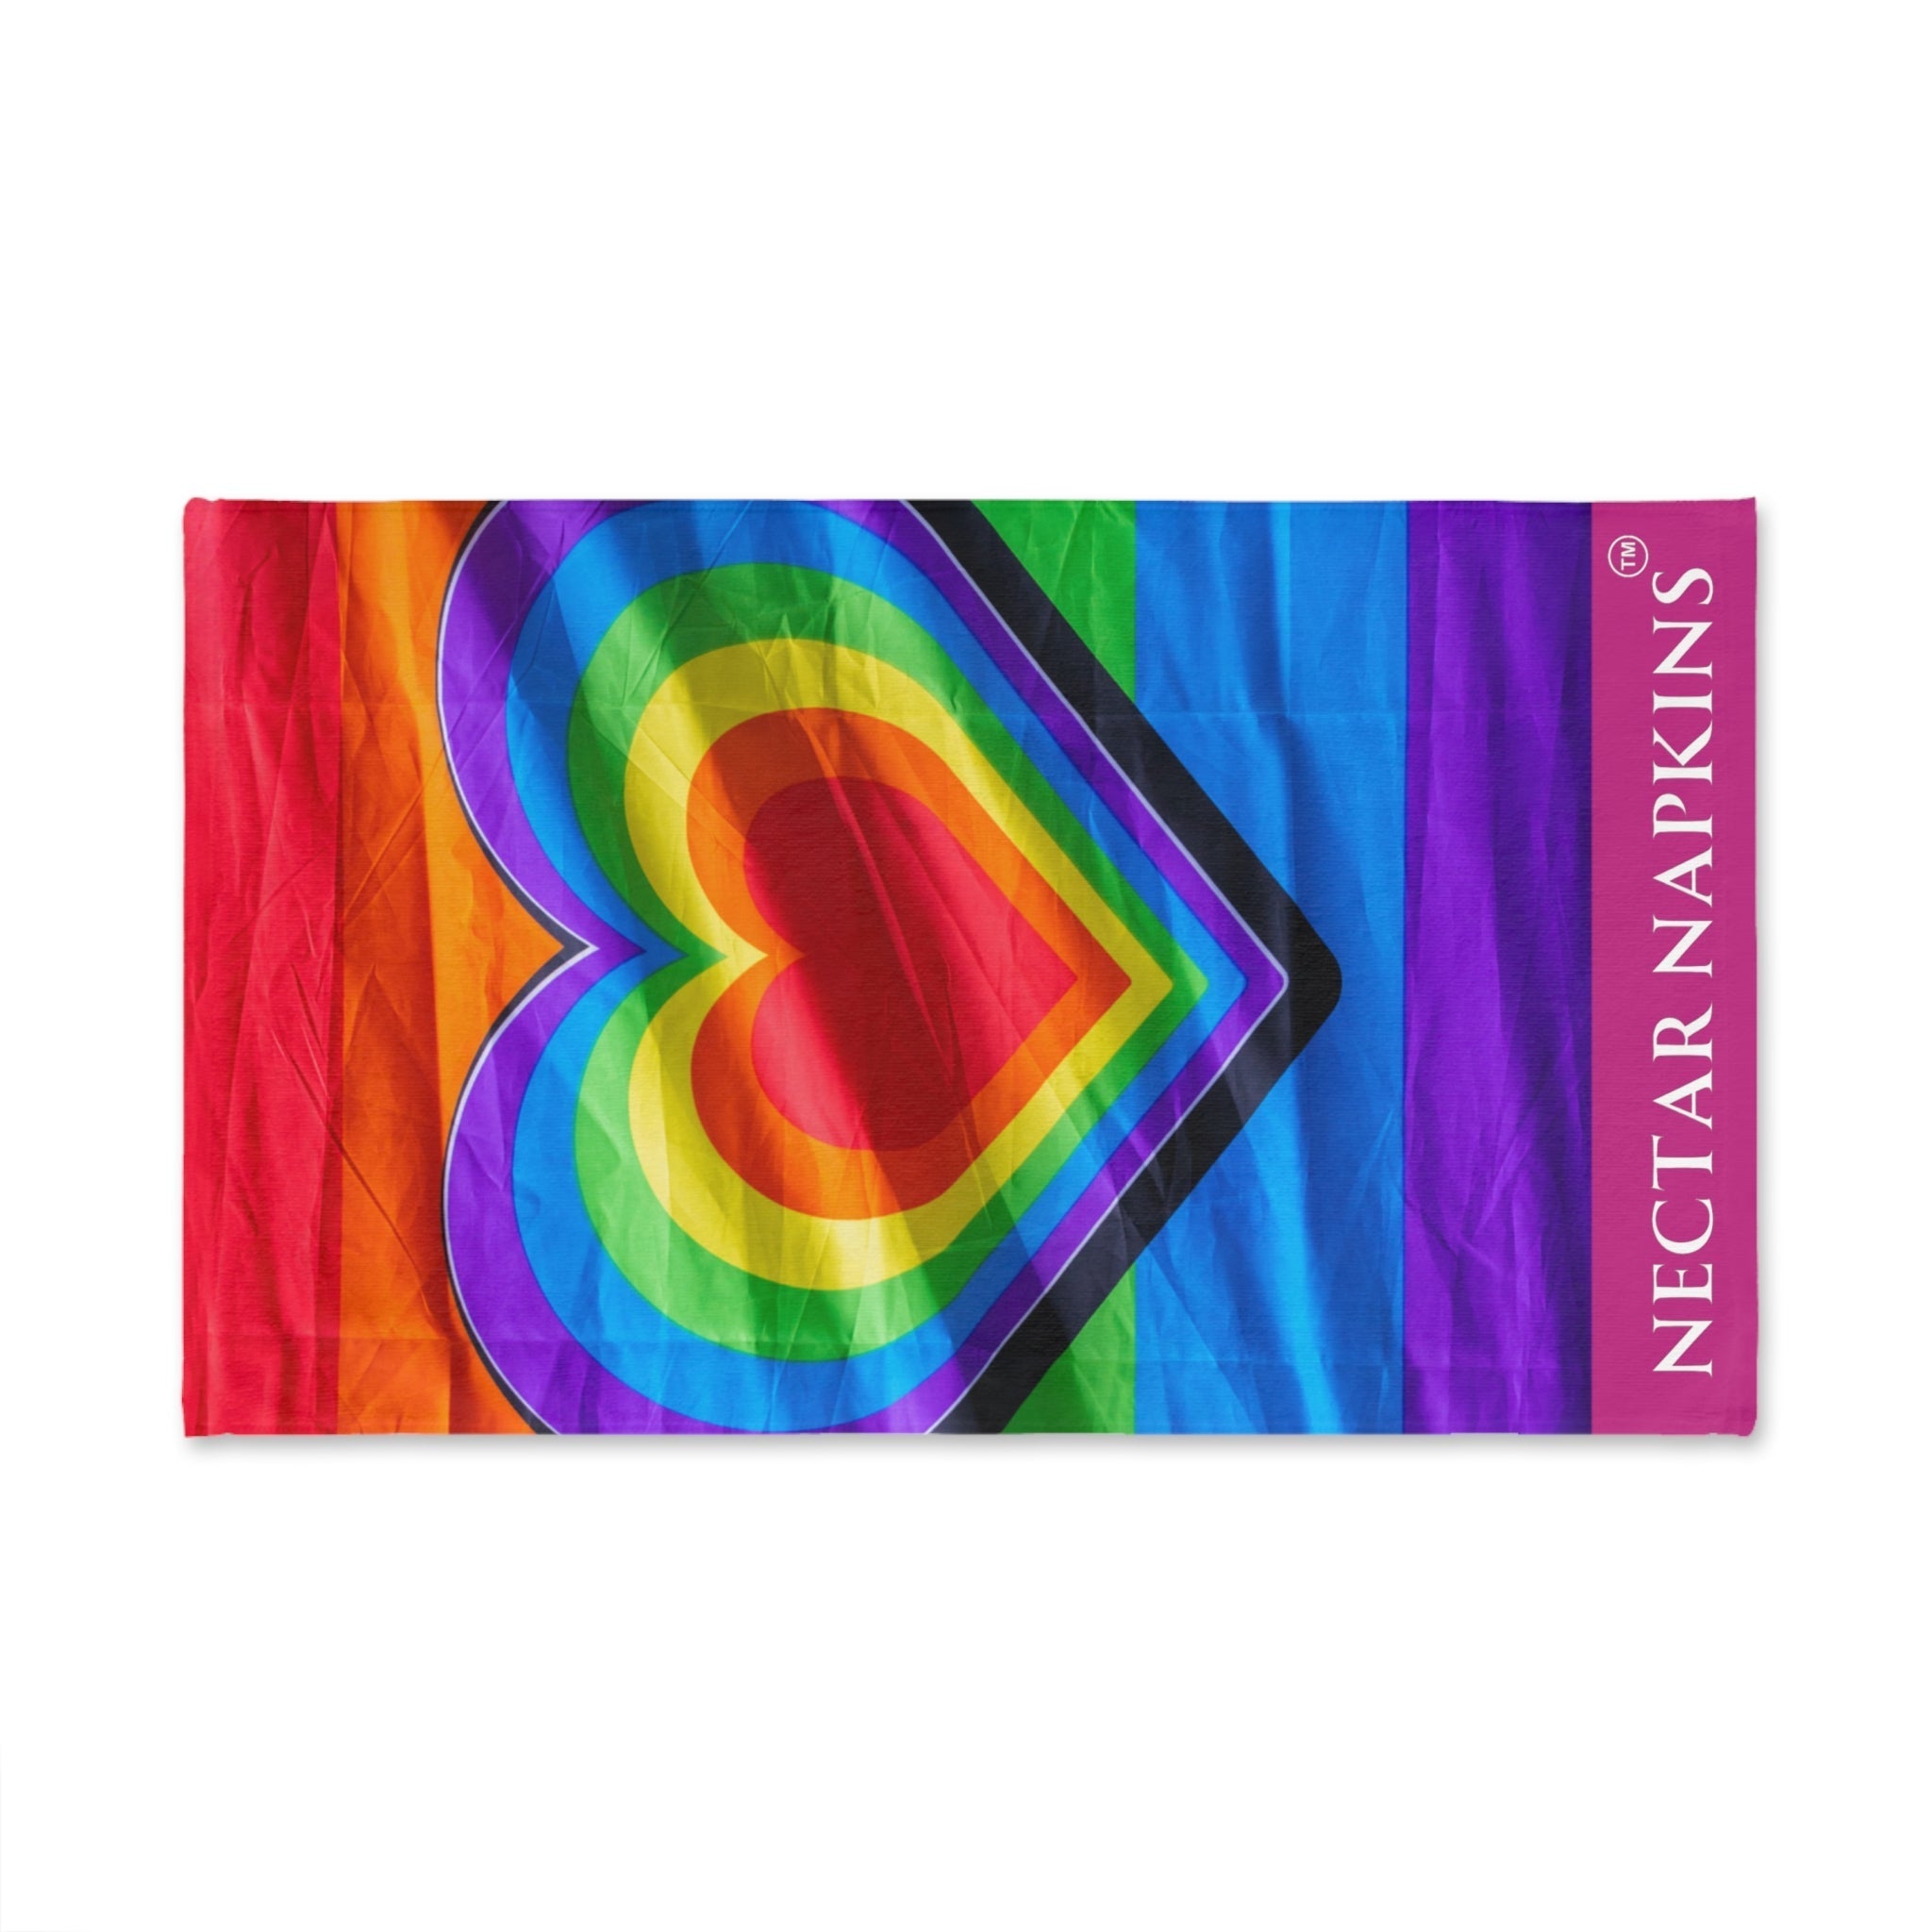 Rain Bow Heart 3D Fuscia | Funny Gifts for Men - Gifts for Him - Birthday Gifts for Men, Him, Husband, Boyfriend, New Couple Gifts, Fathers & Valentines Day Gifts, Hand Towels NECTAR NAPKINS